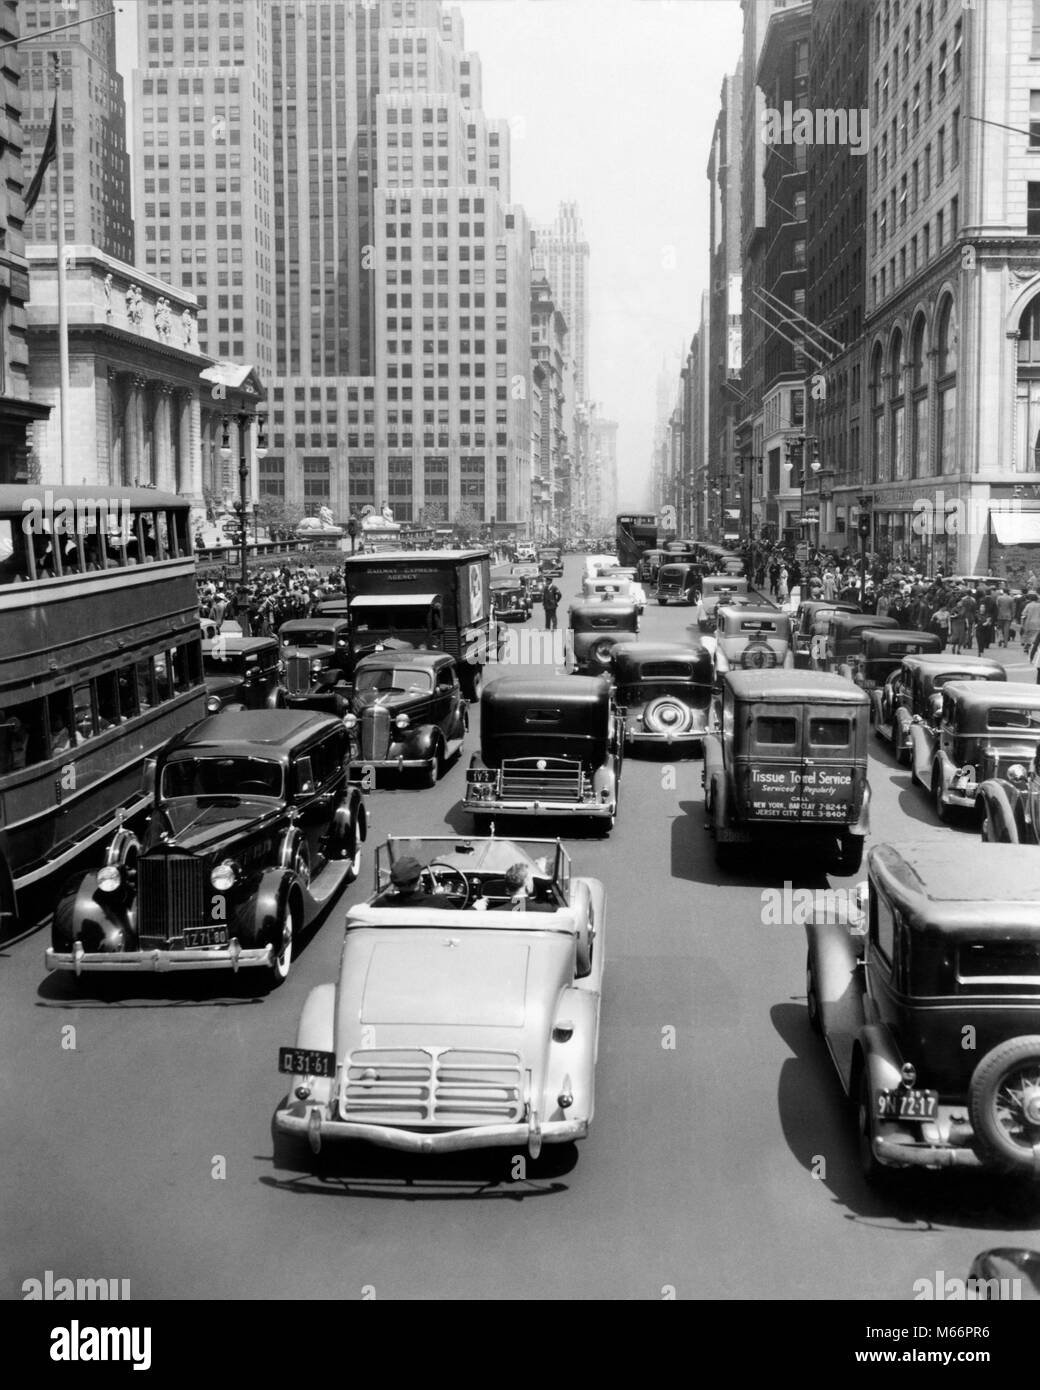 1930s CARS TRUCKS DOUBLE DECKER BUSES STREET TRAFFIC 5TH AVENUE TRAFFIC BY PUBLIC LIBRARY MANHATTAN NEW YORK CITY USA - t2251 HAR001 HARS SUCCESS TRUCKS MIDTOWN AUTOS EXCITEMENT PROGRESS GOTHAM DIRECTION NYC NEW YORK AUTOMOBILES CITIES VEHICLES NEW YORK CITY BUSES CONGESTION TRANSIT 5TH AVENUE B&W BLACK AND WHITE DECKER DOUBLE DECKER FIFTH AVENUE OLD FASHIONED Stock Photo